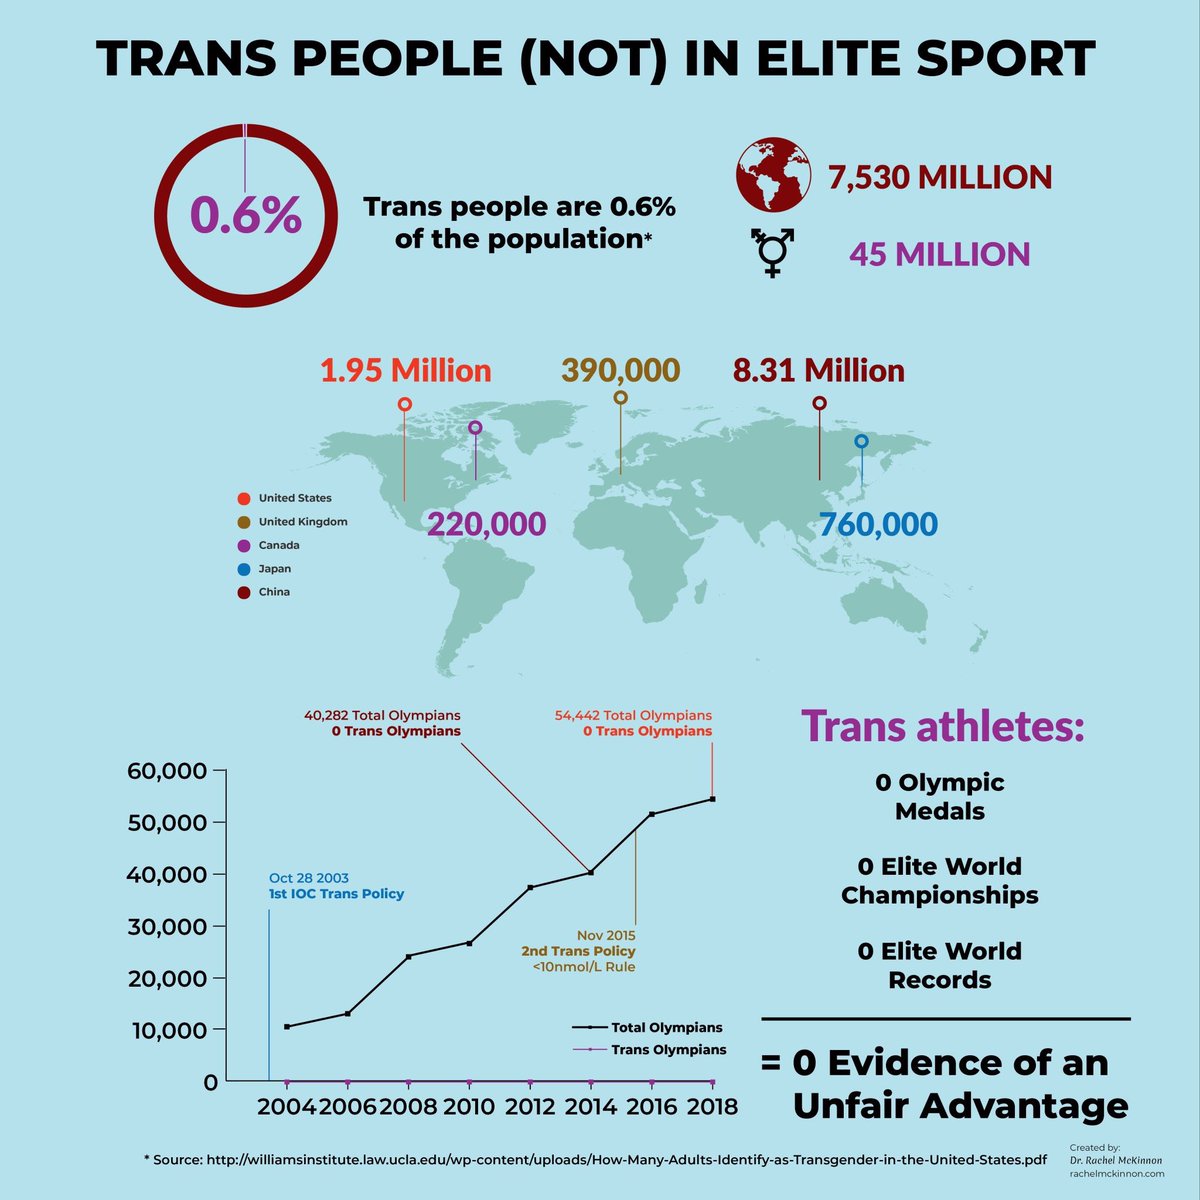 And for all those people with ‘legitimate concerns’ about trans participation in sports. Just take a look at this infographic. Trans people aren’t our here winning left and right, quite the opposite